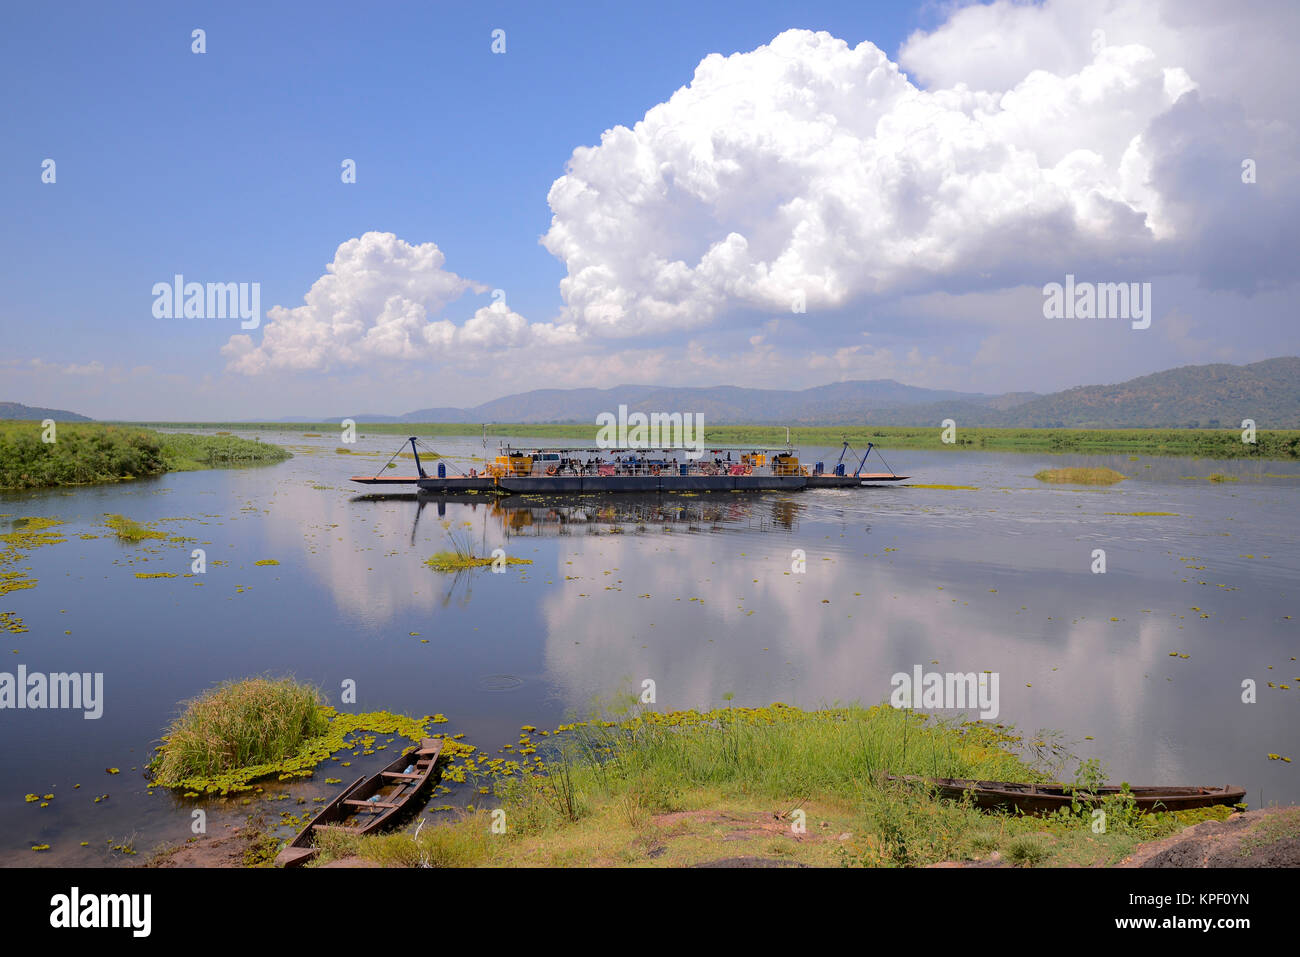 Uganda is called 'The pearl of Africa' because of its beautiful landscapes, friendly people, and abundance of rain. Ferry crossing the Nile river Stock Photo